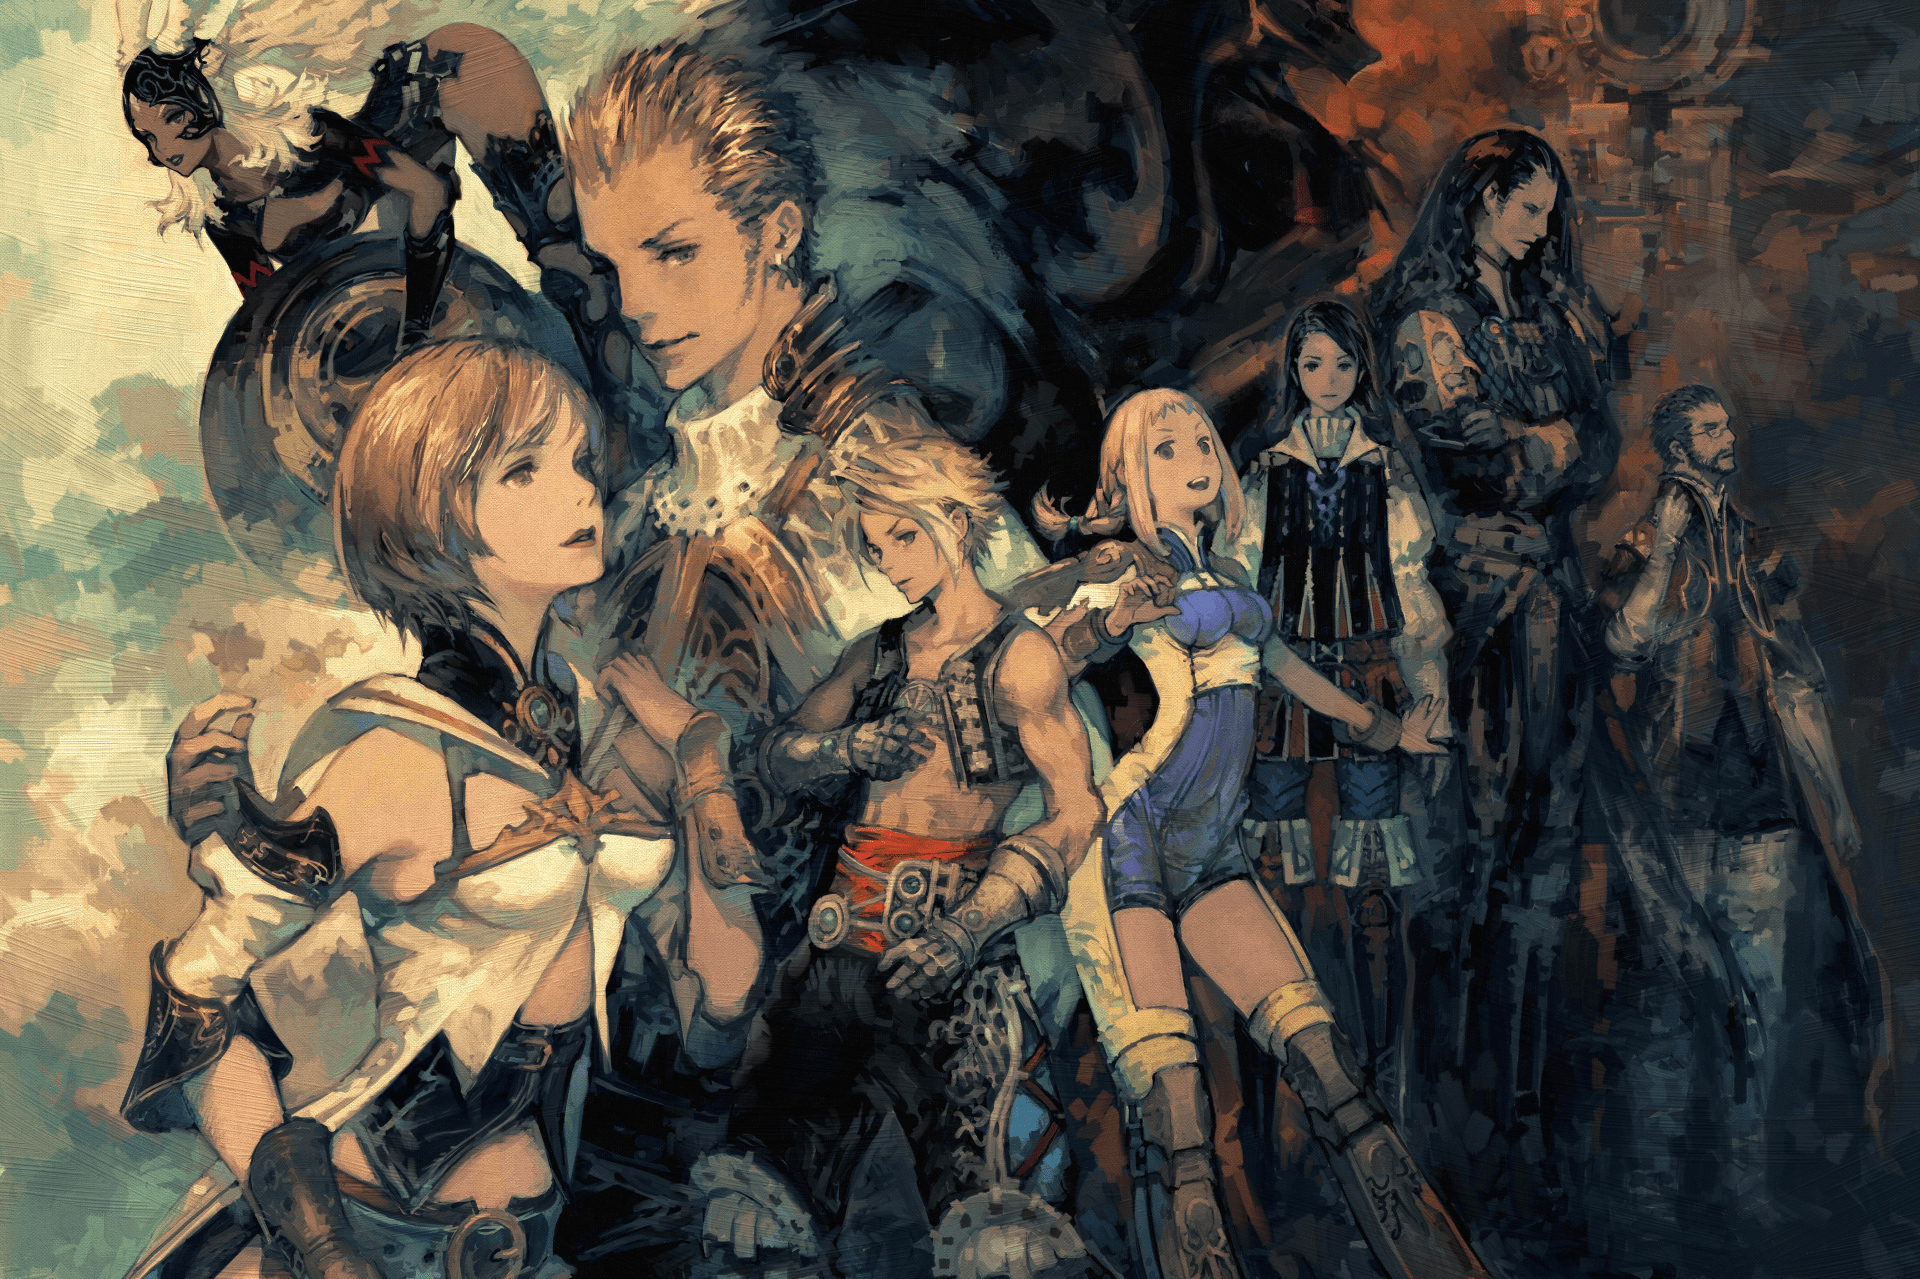 Final Fantasy Xii Video Game Art Artwork Video Game Characters Video Games Square Enix JRPGs Fantasy 1920x1279